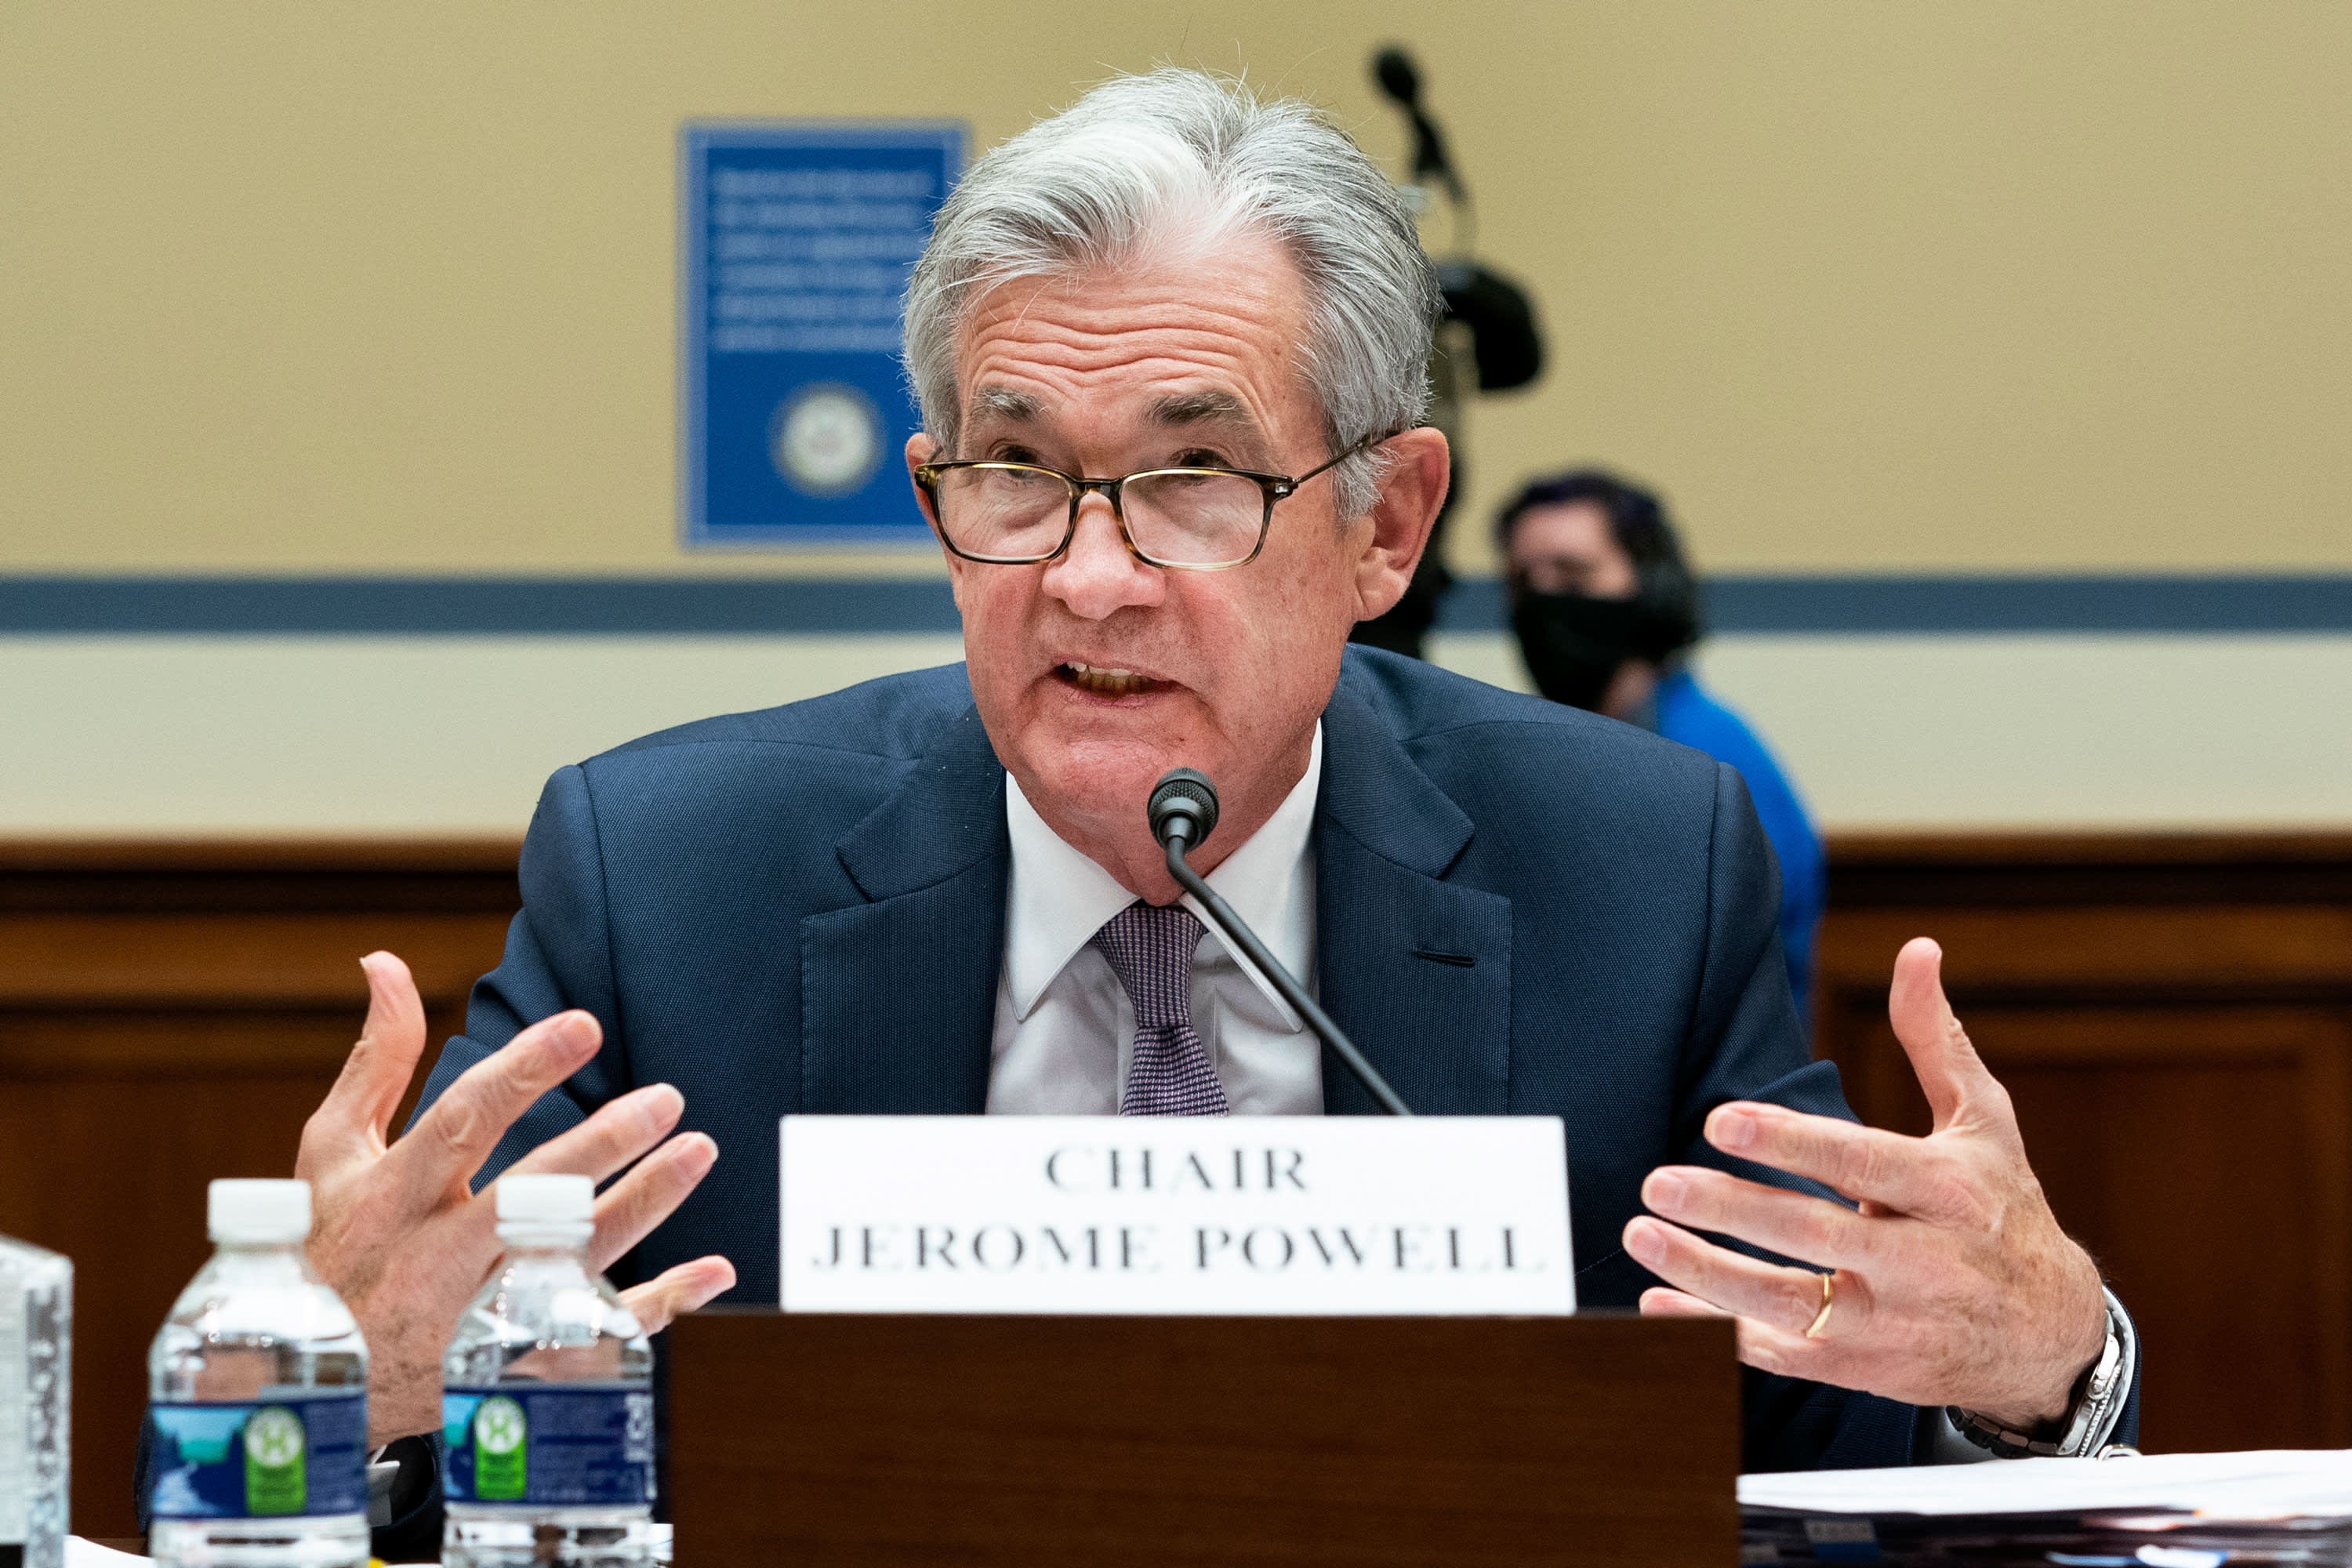 Powell does not see interest rate hikes on the horizon, as long as inflation remains low